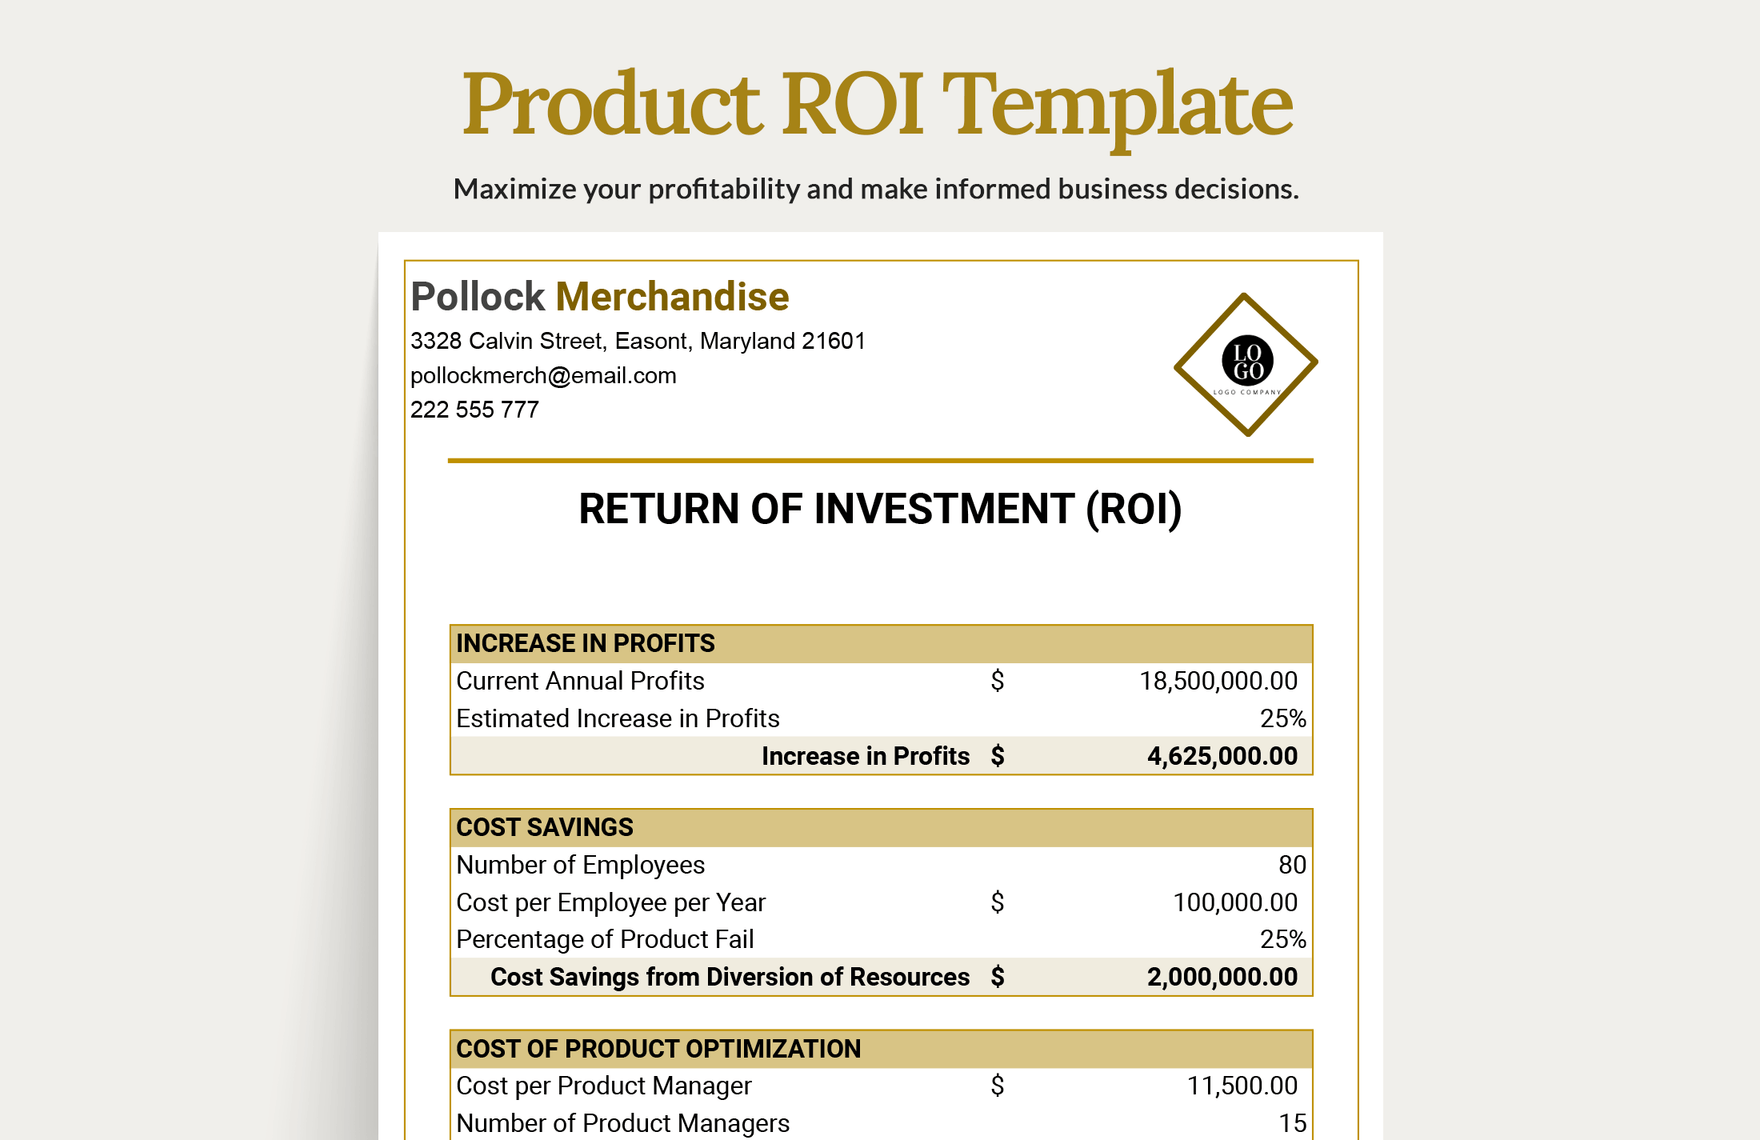 Product ROI Template